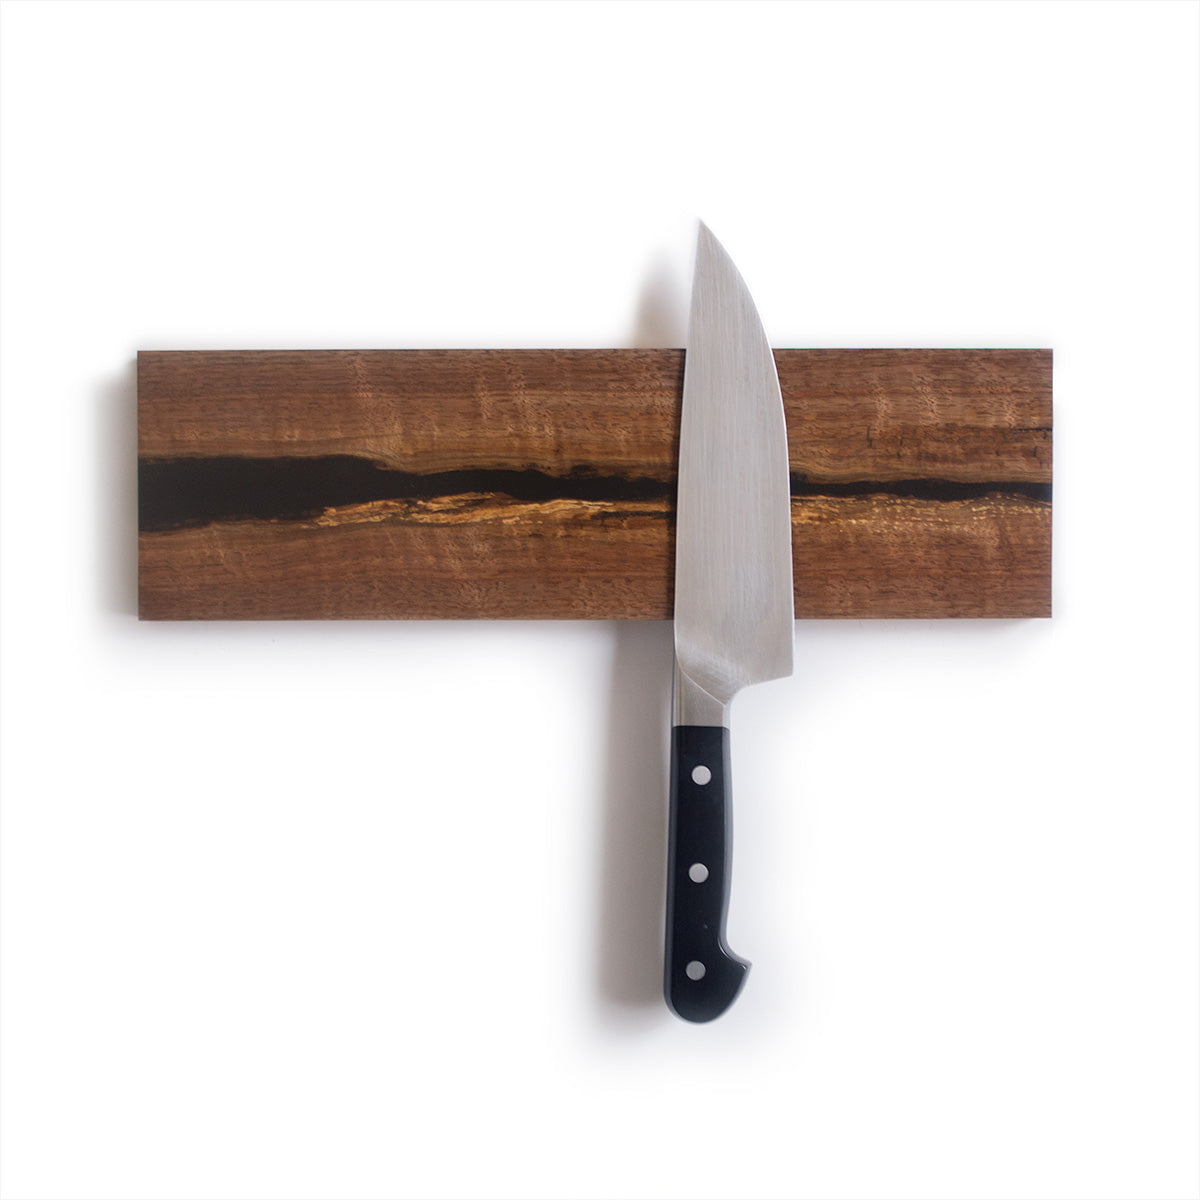 walnut live edge epoxy resin magnetic knife holder handcrafted with salvaged black walnut lumber and food safe epoxy resin